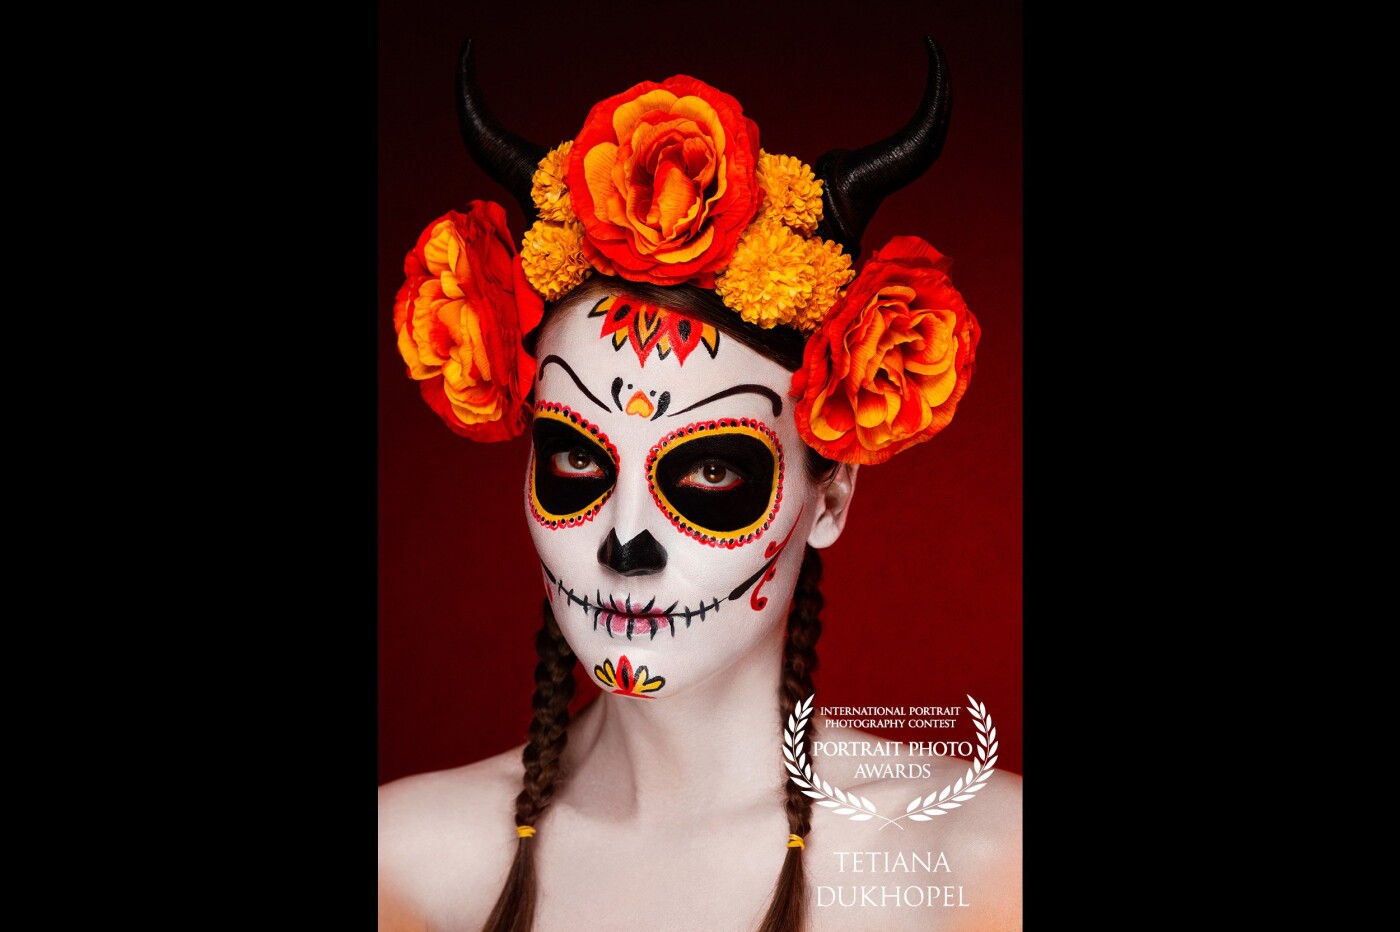 It was my first creative project. I picked the theme Day of the Dead. It was so much fun to see the transformation and the result after. And I would use the words of Pablo Picasso "Art is the lie that enables us to realize the truth."